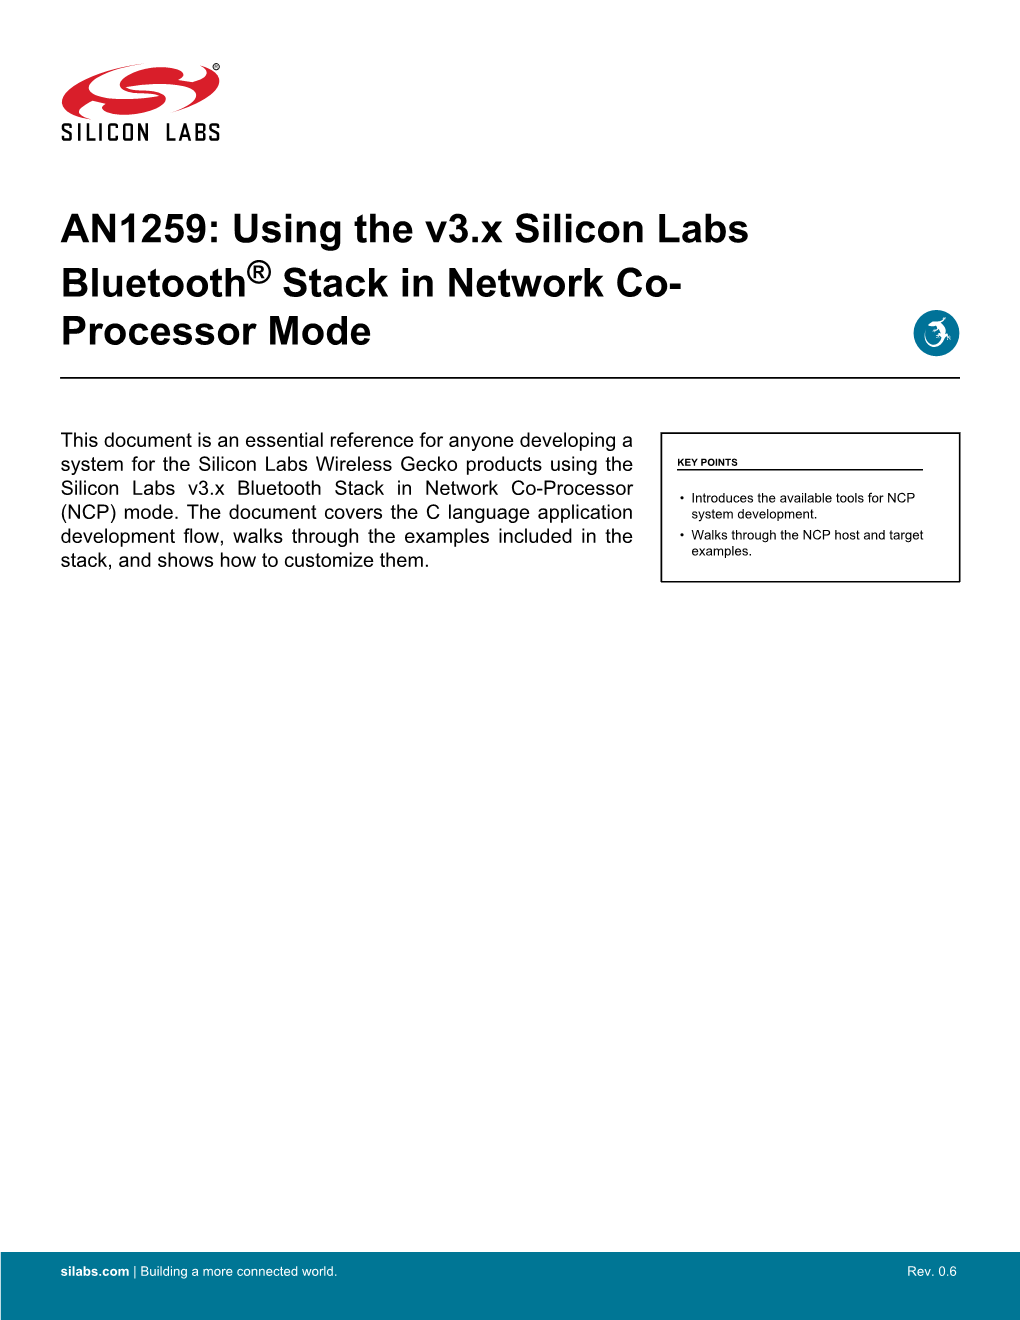 AN1259: Using the V3.X Silicon Labs Bluetooth® Stack in Network Co- Processor Mode